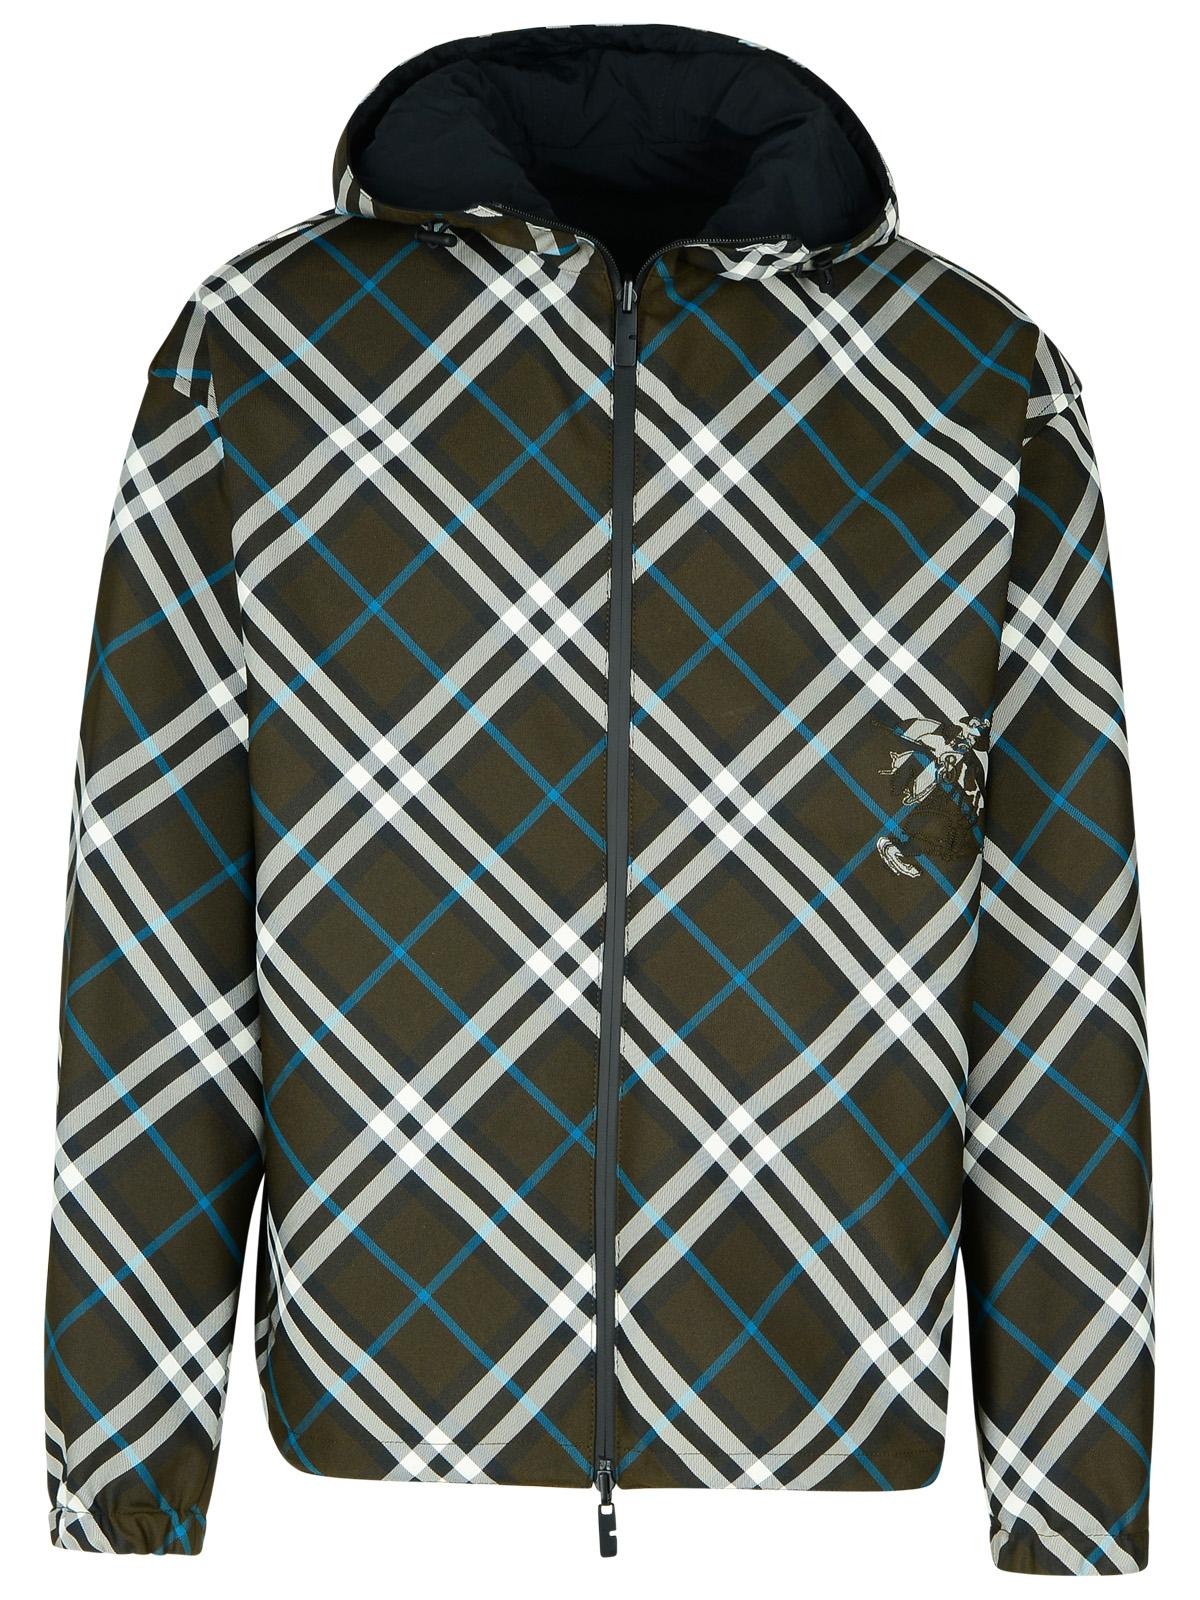 Burberry 'Check' Reversible Green Polyester Jacket Man - 1